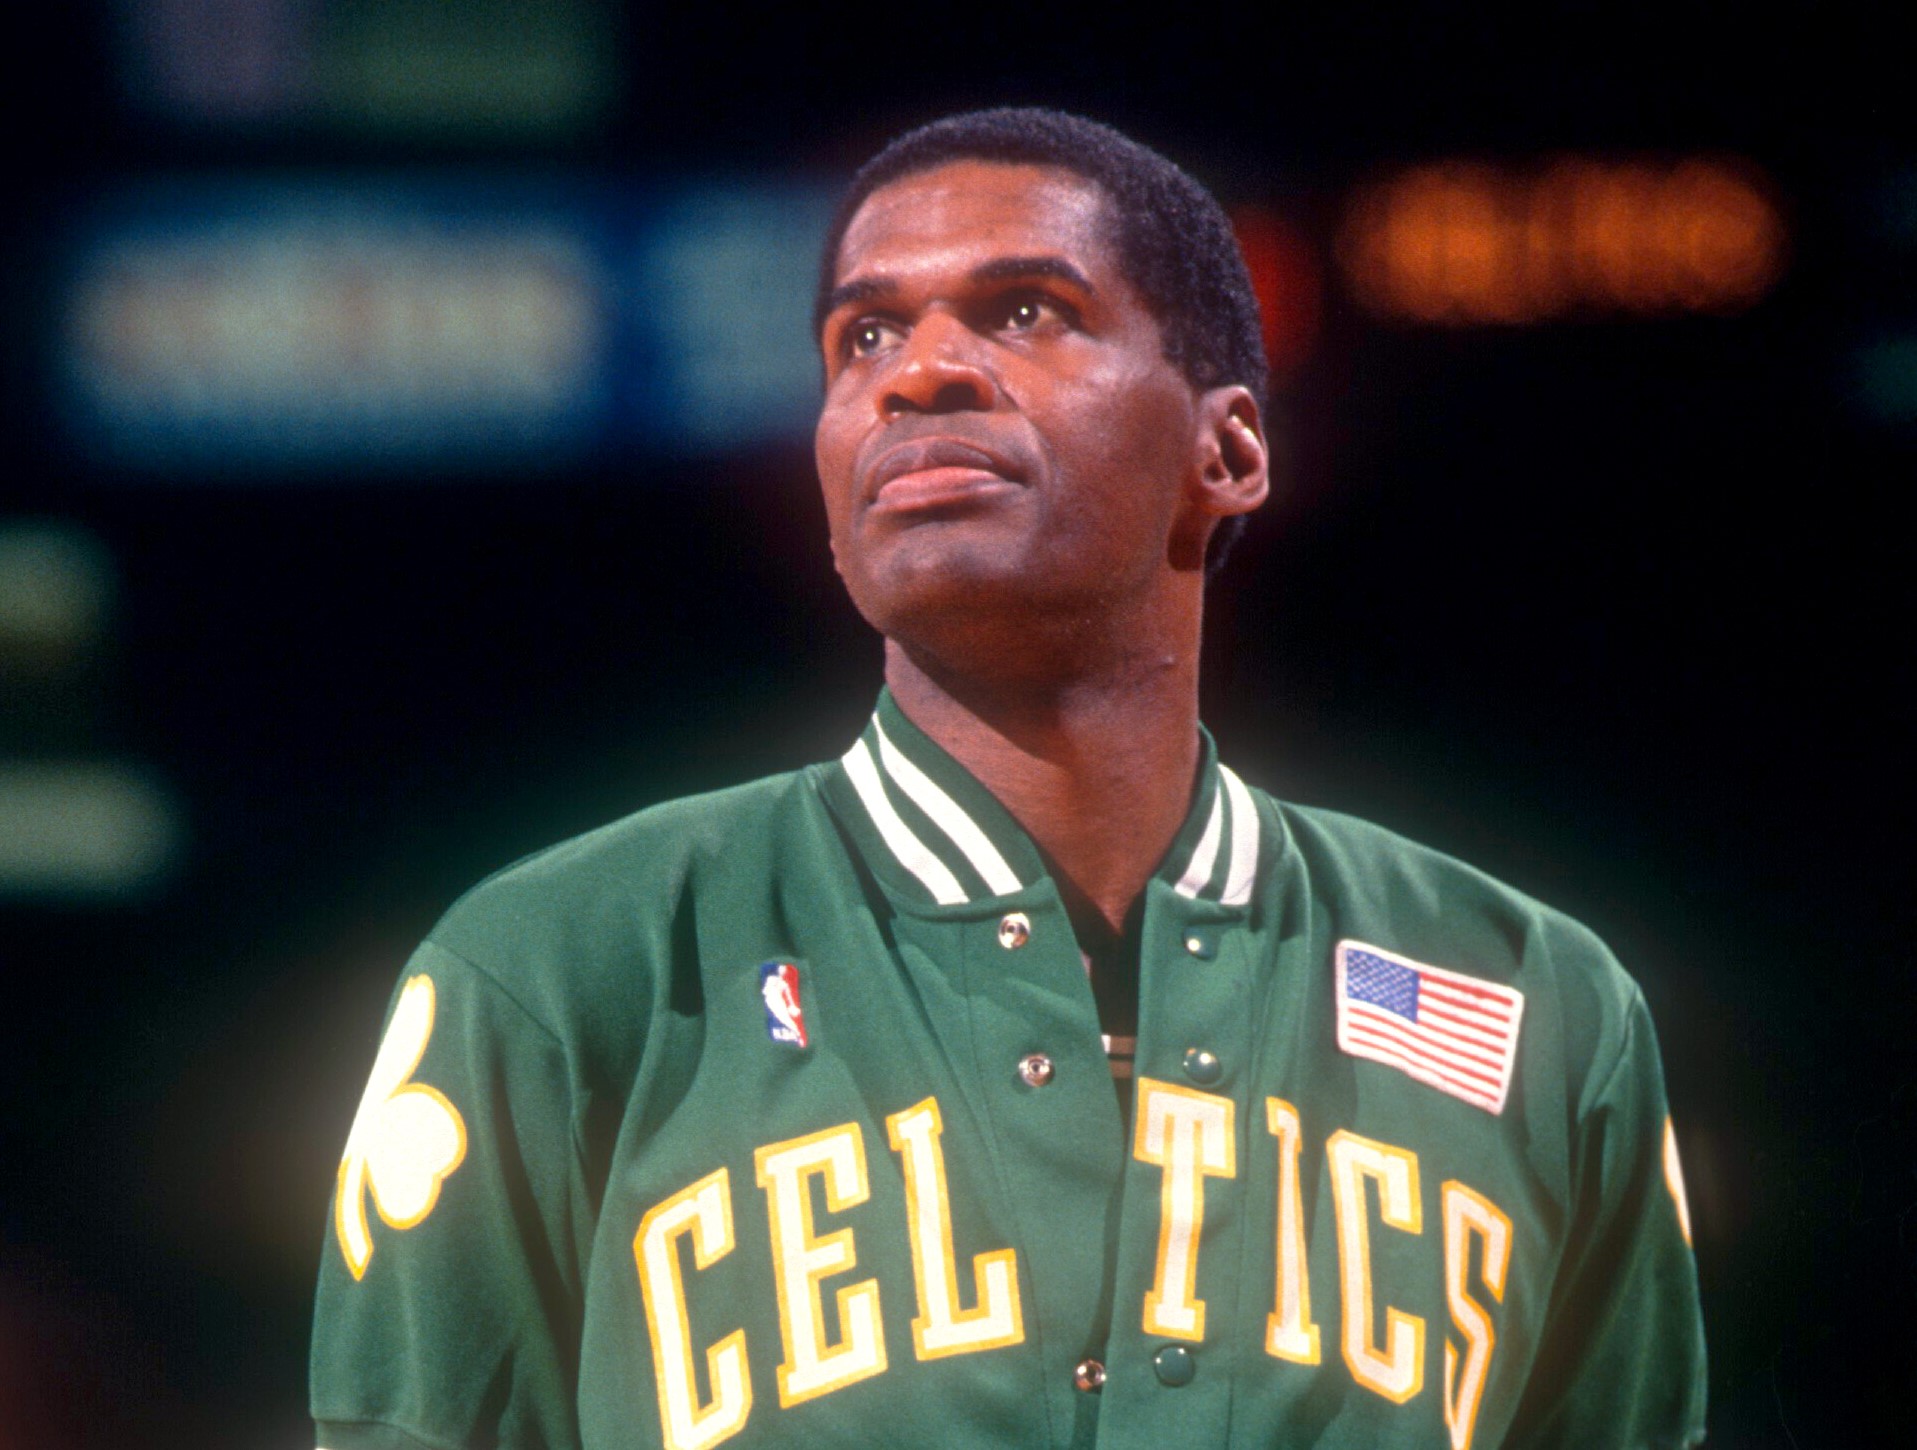 Robert Parish of the Boston Celtics walks on the court during warm-ups prior to an NBA game against the Philadelphia 76ers.